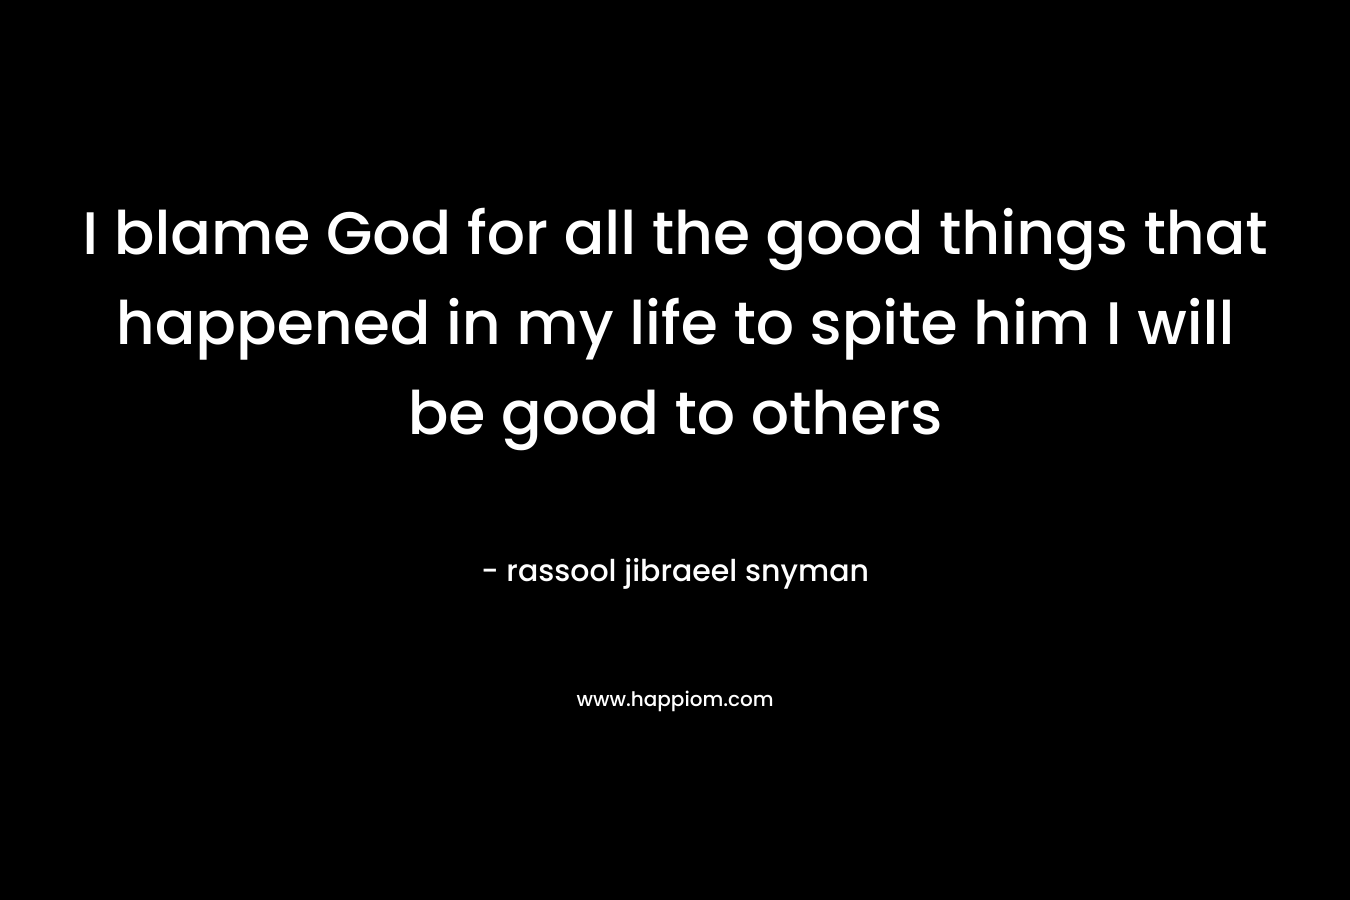 I blame God for all the good things that happened in my life to spite him I will be good to others